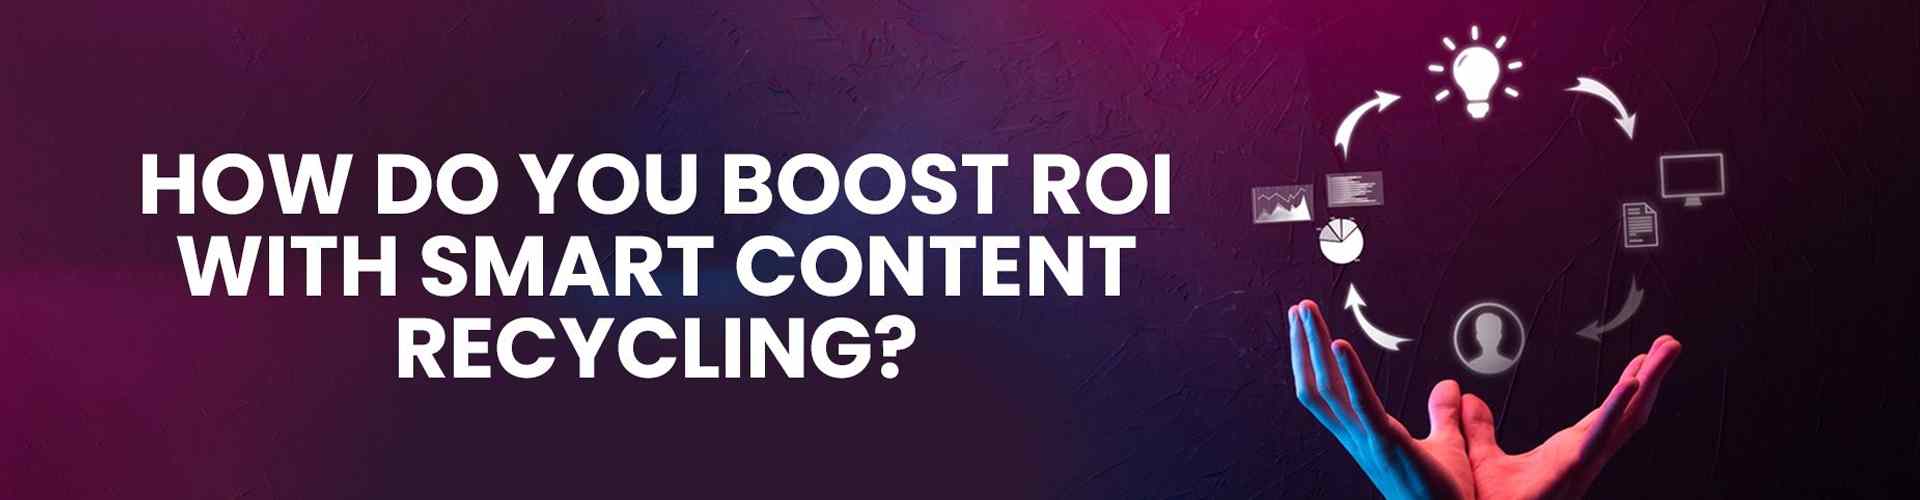 boost ROI with smart content recycling